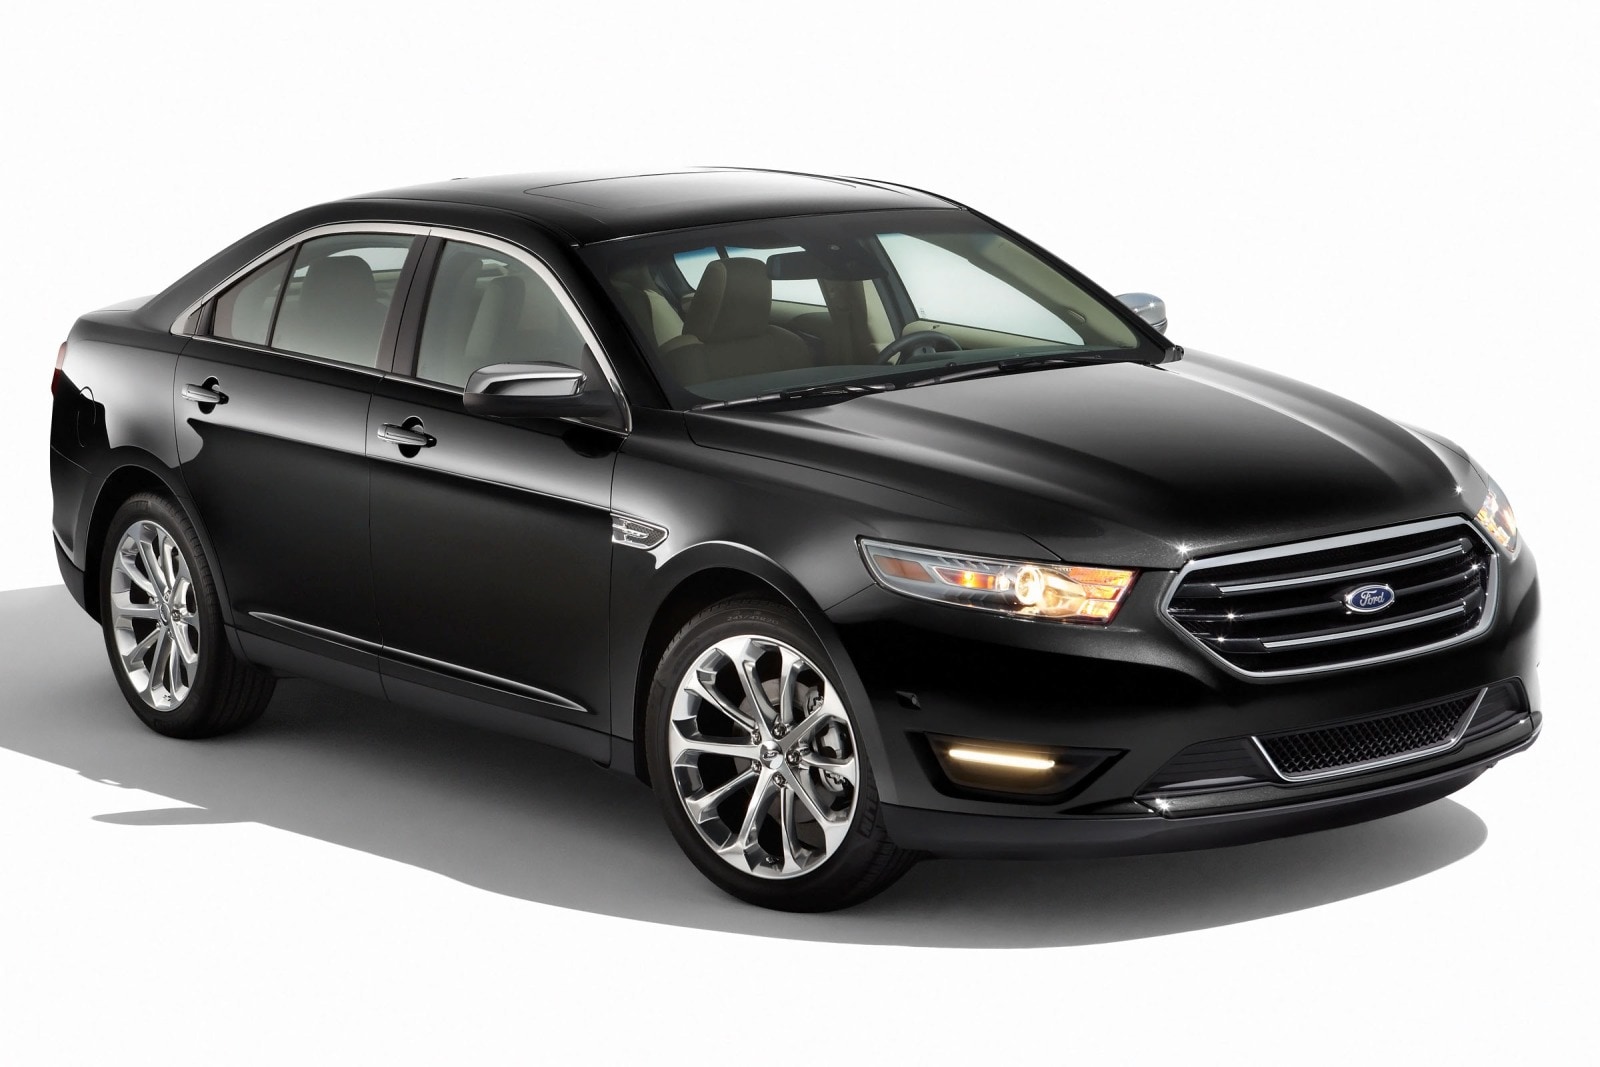 2013 Ford Taurus Review & Ratings | Edmunds